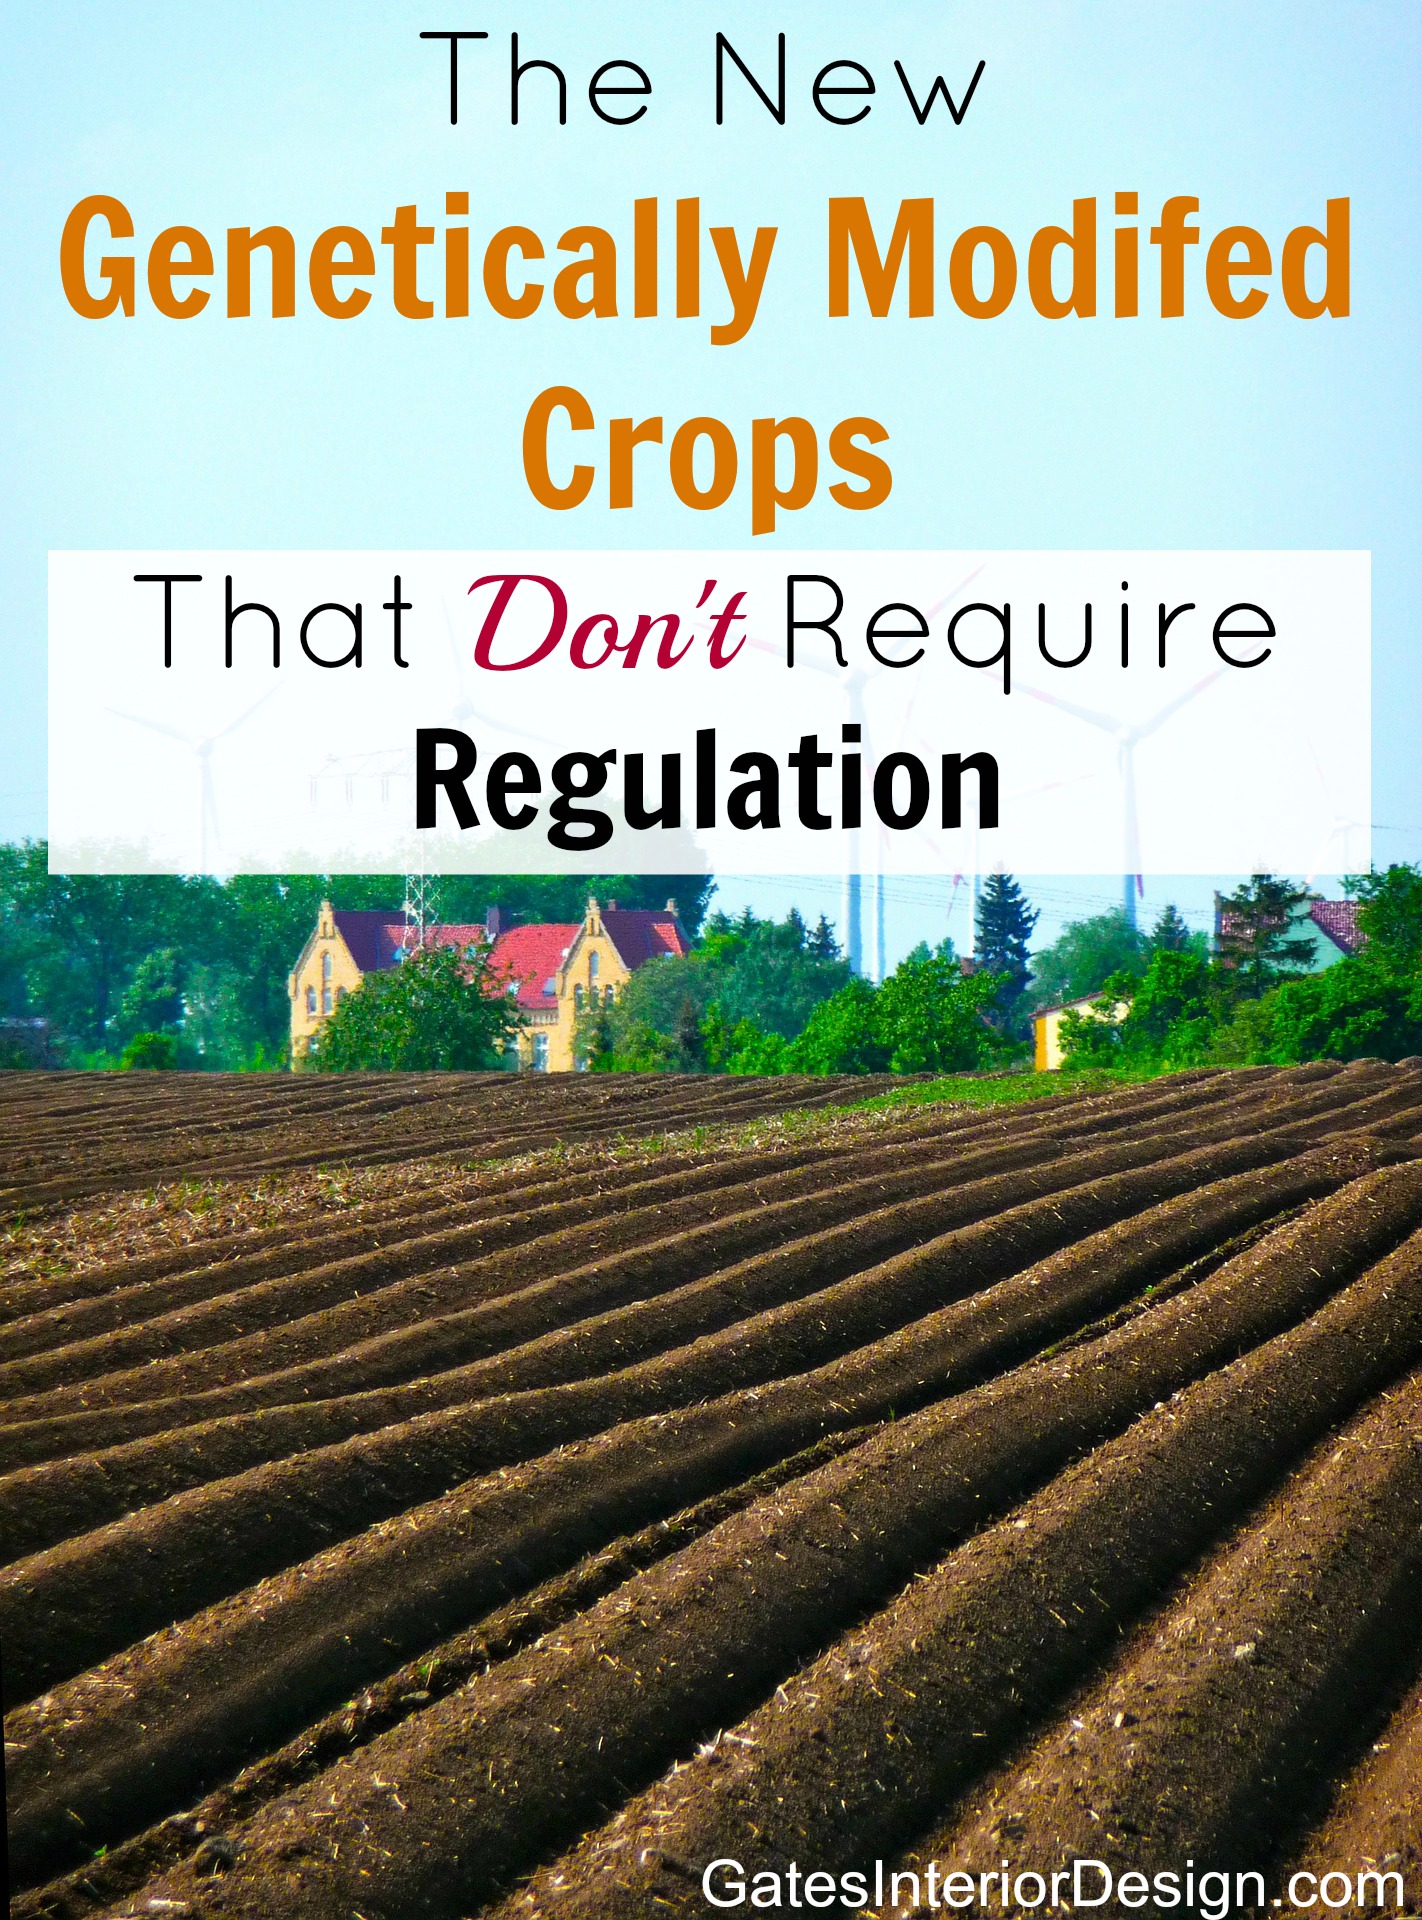 The new genetically modified crops that don’t require regulation